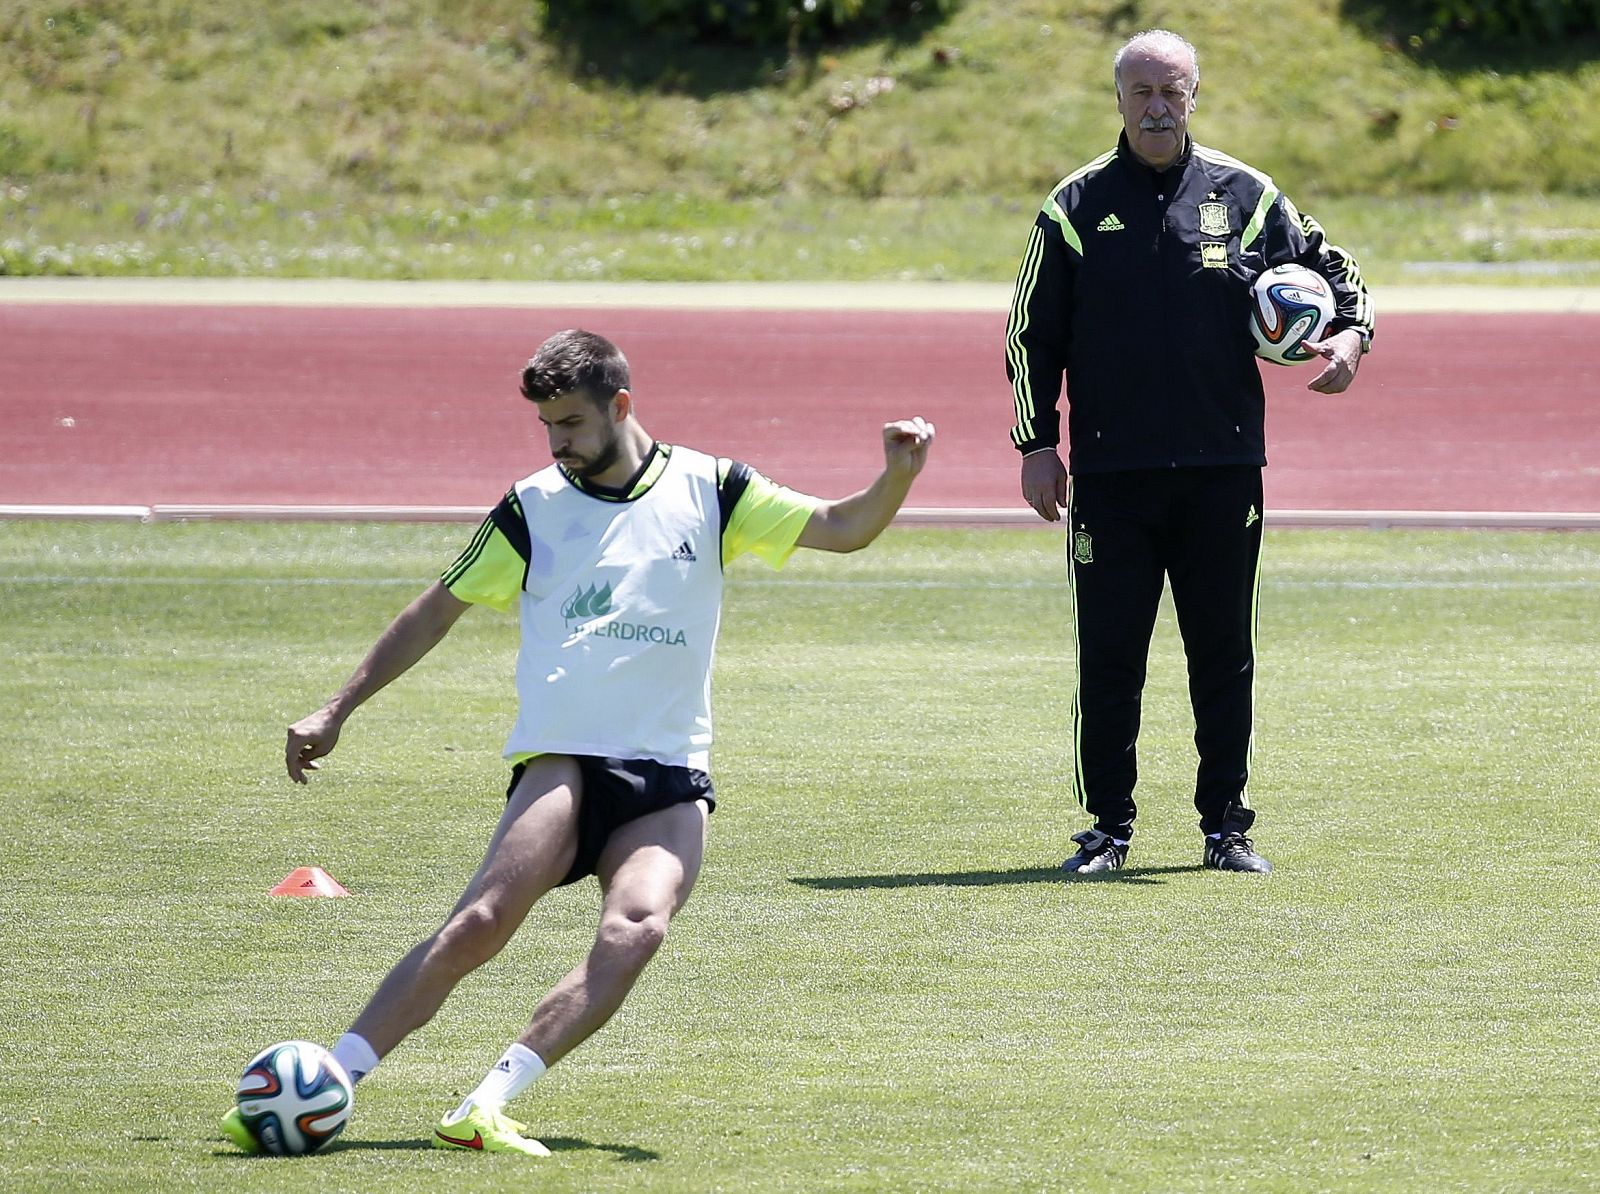 Spanish national soccer coach del Bosque looks on as Pique kicks the ball during a training session of the national soccer team at Las Rozas playground near Madrid